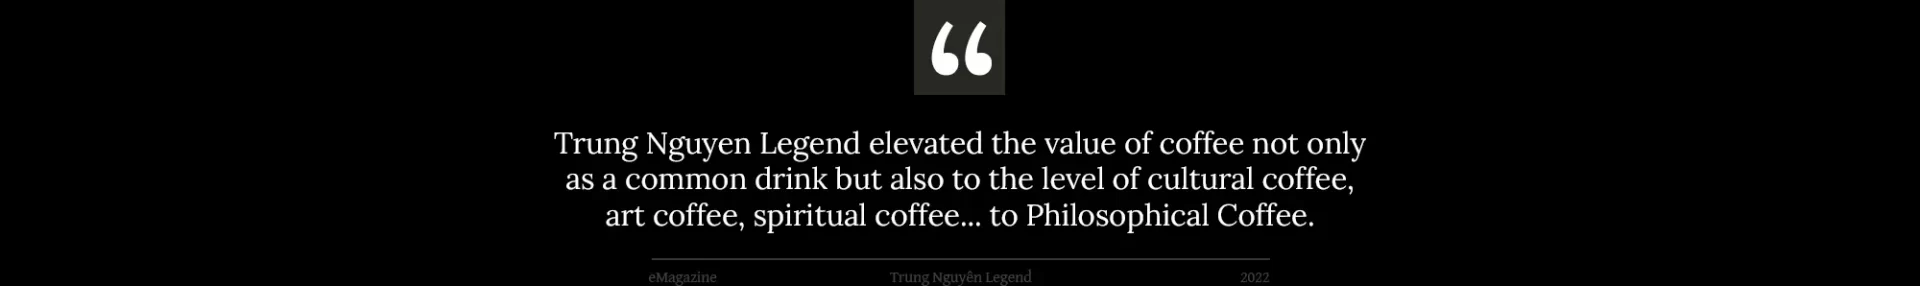 Trung Nguyen Legend elevated the value of coffee not only as a common drink but also to the level of cultural coffee, art coffee, spiritual coffee... to Philosophical Coffee.